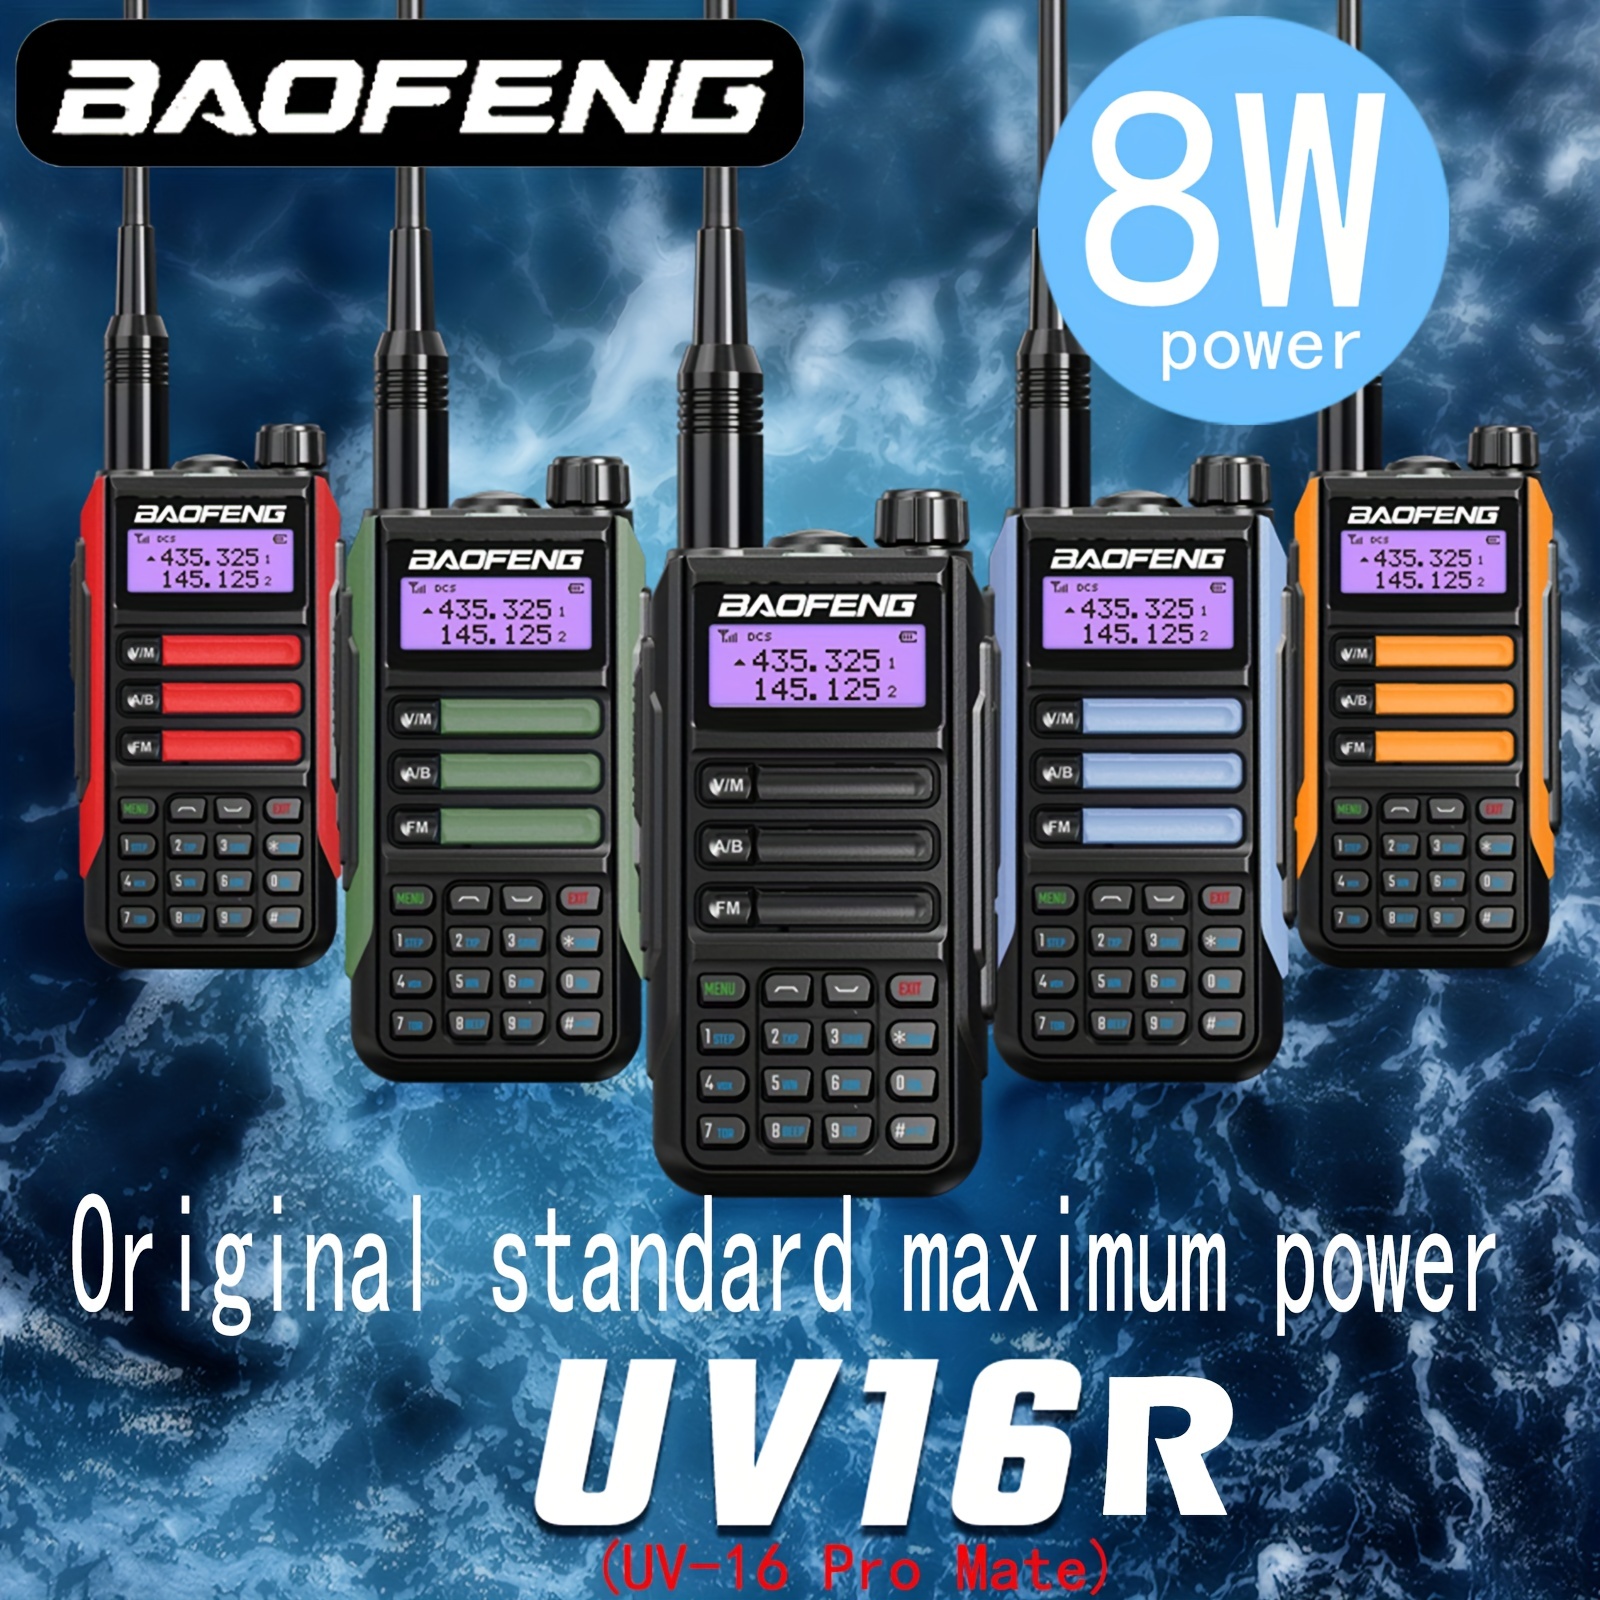 Adapter Cable Baofeng UV-9R Pro v2 Waterproof Walkie Talkie 2 Pin K Headset  Speaker Mic for UV-XR BF-9700 GMRS-9R GT-3WP Radio